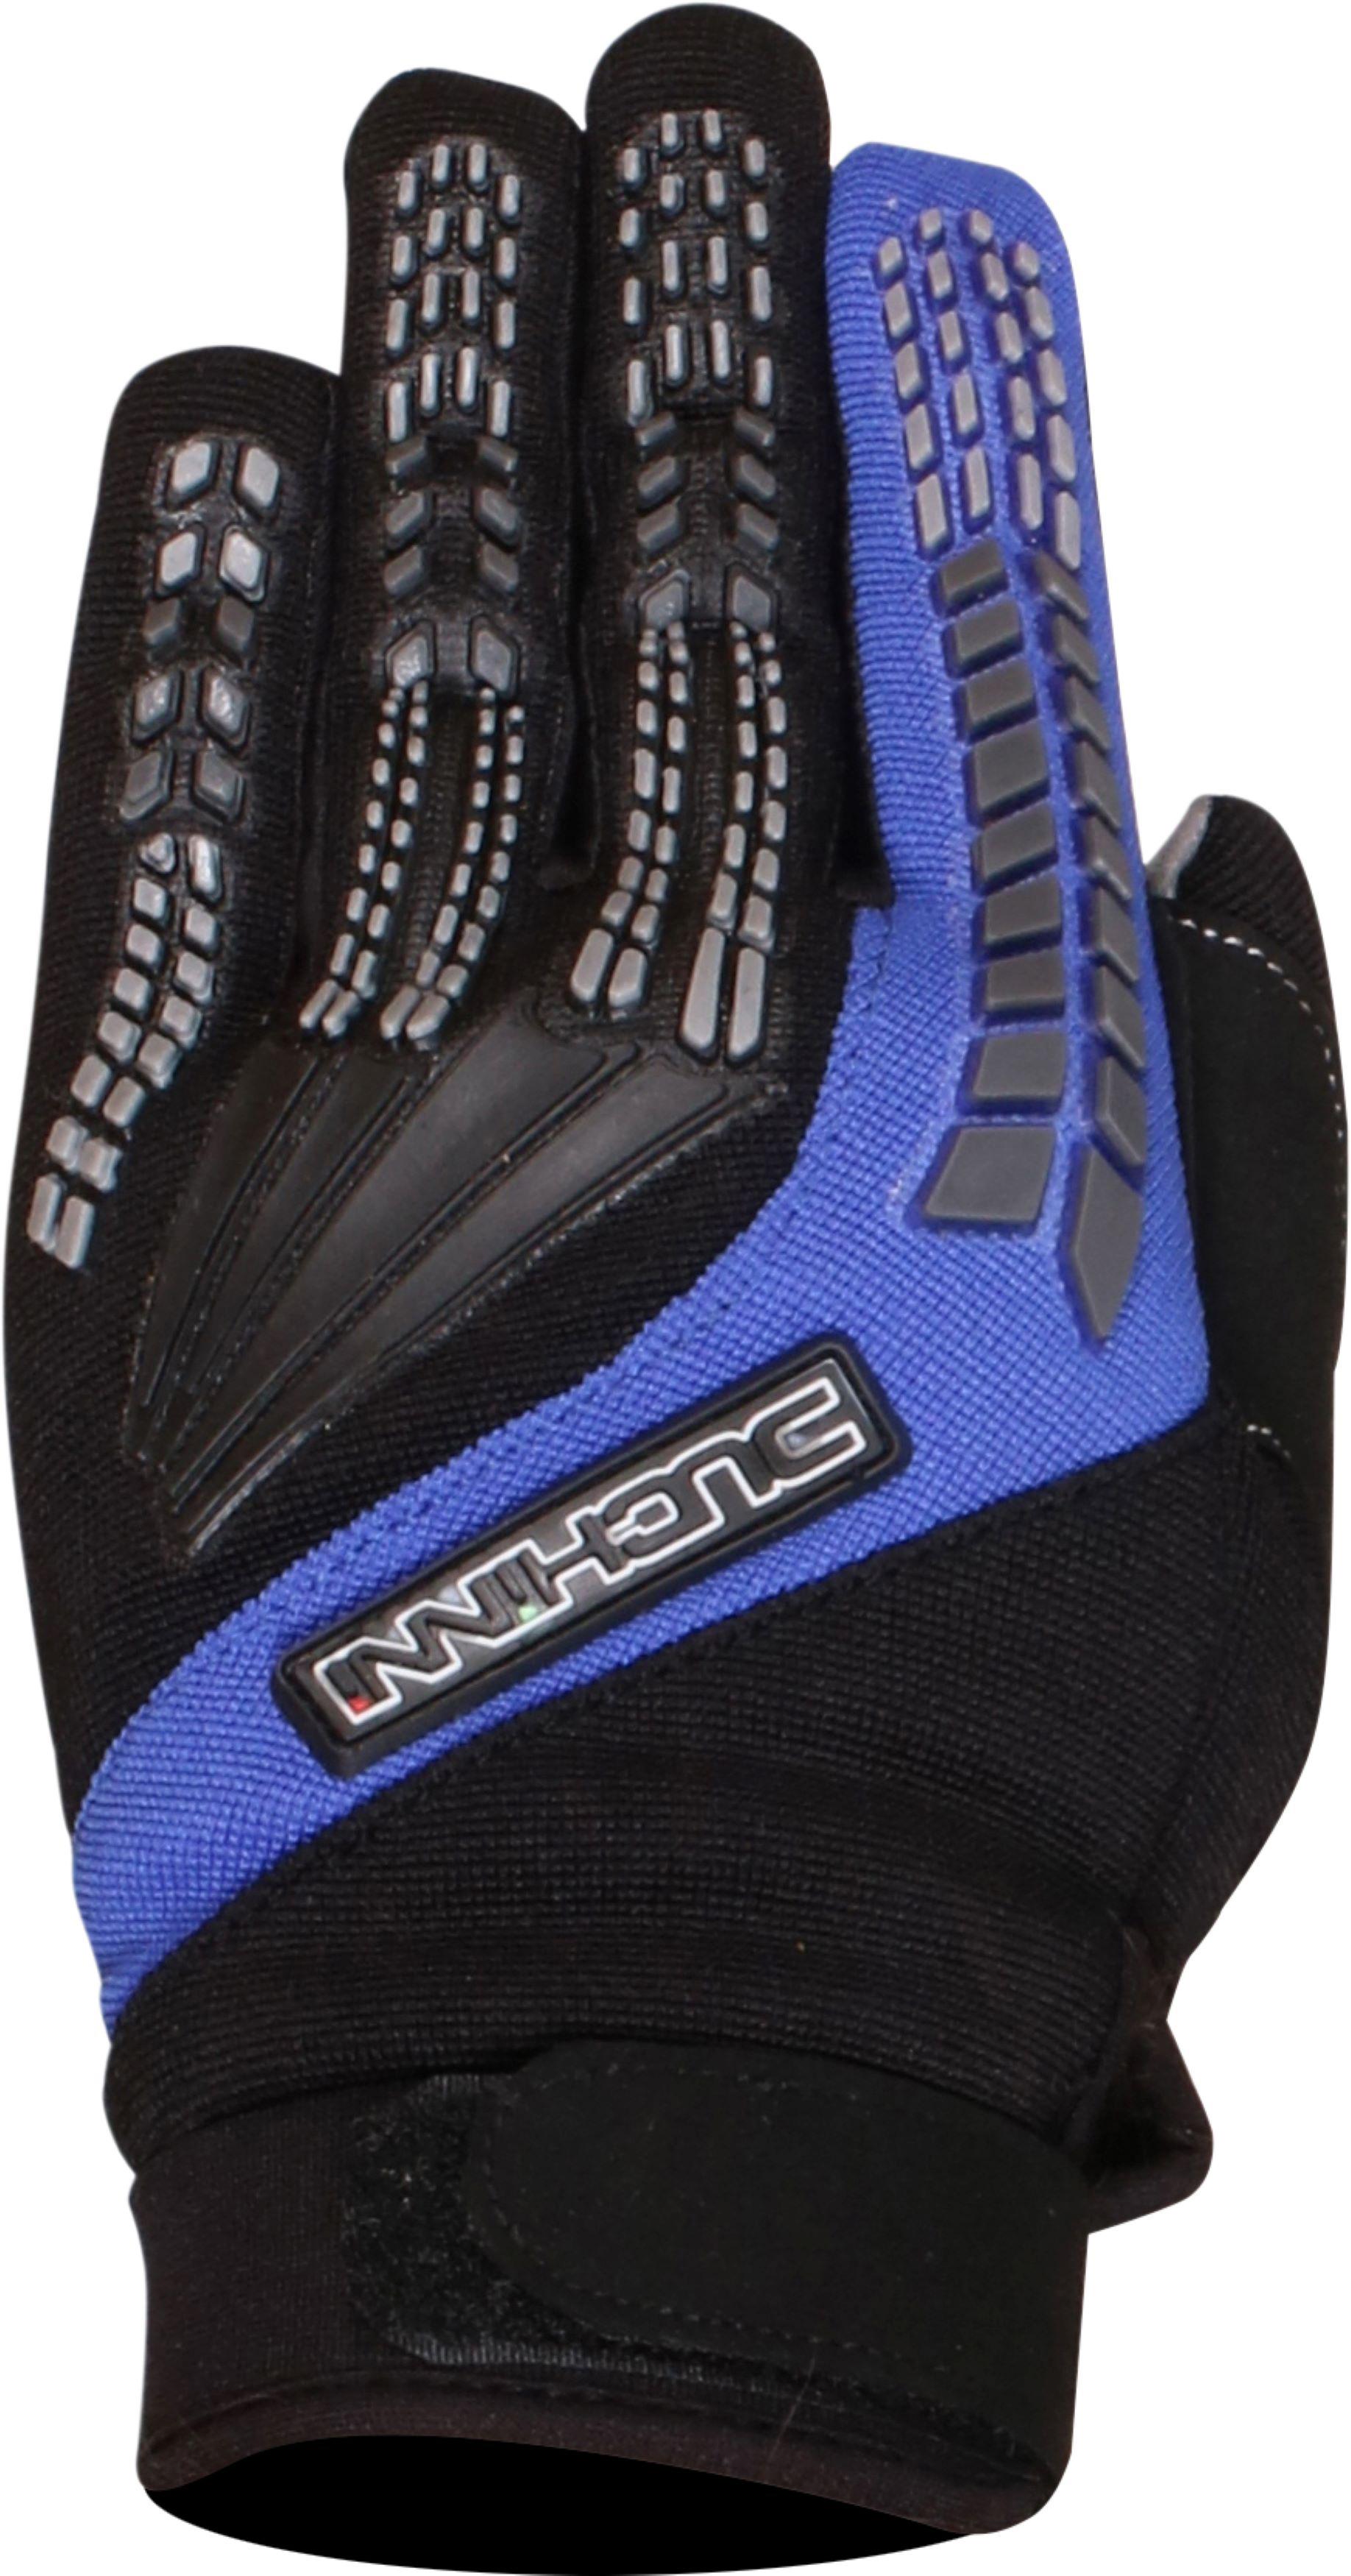 Duchinni Focus Motorcycle Gloves - Black And Blue, M